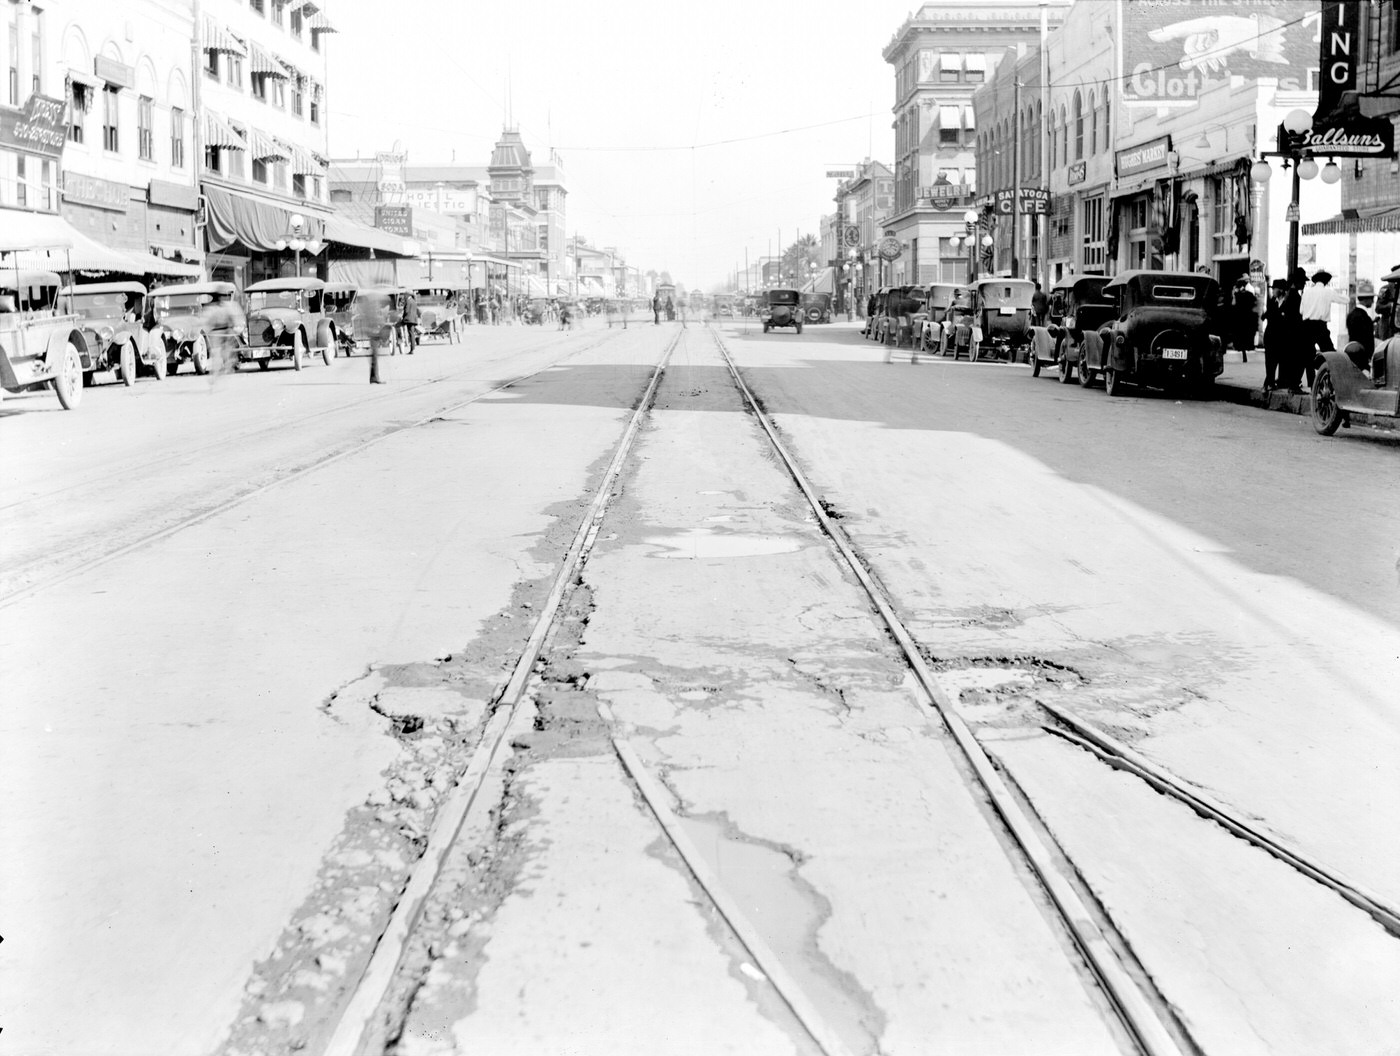 Washington St. Looking East From First Ave, 1920